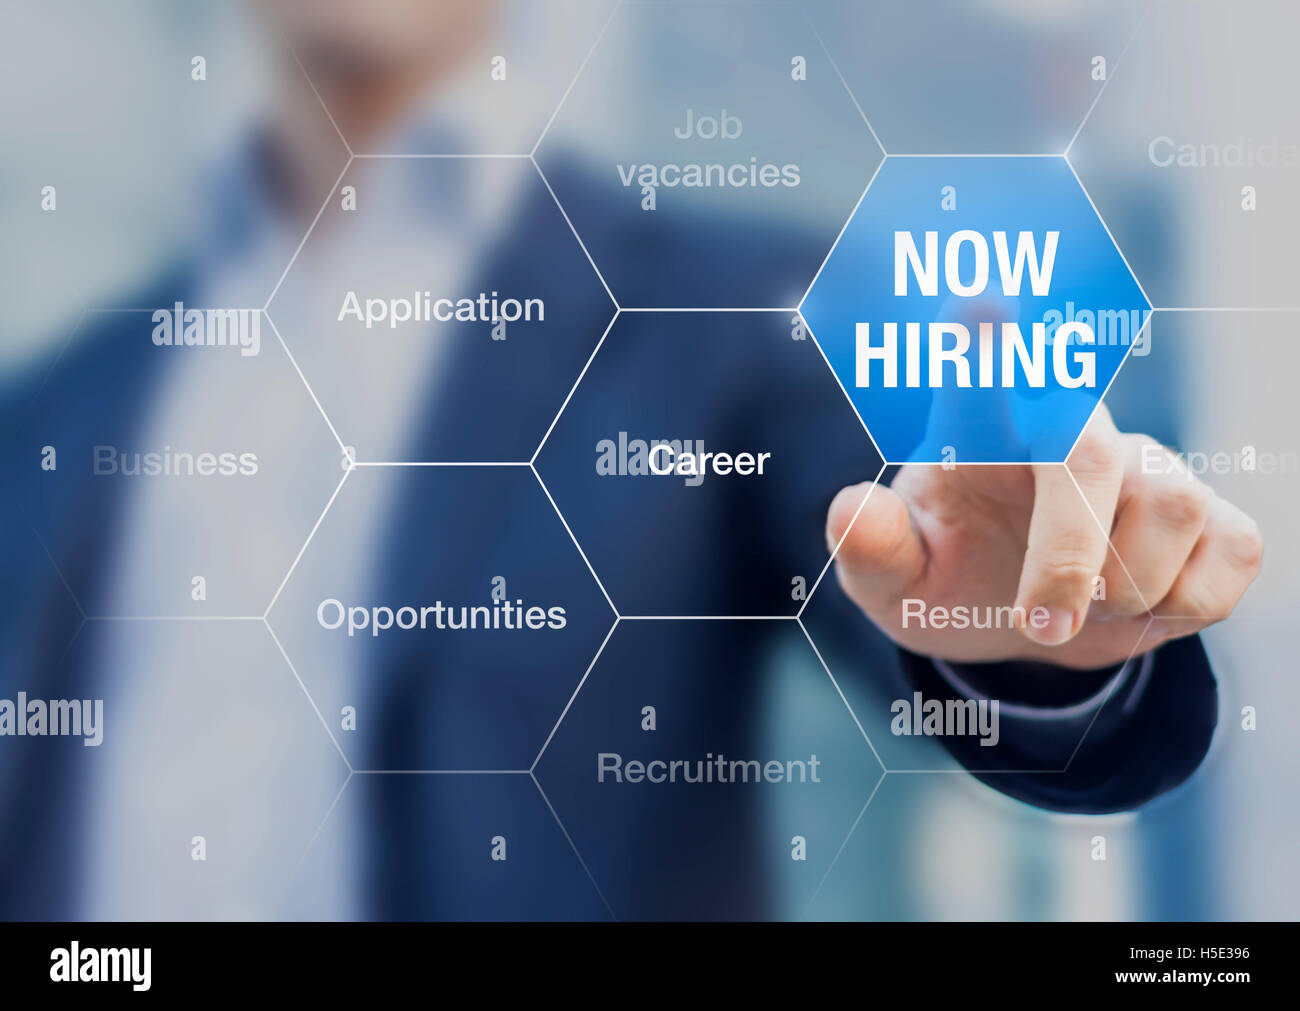 https://c8.alamy.com/comp/H5E396/recruiter-advertising-for-job-vacancies-searching-candidates-to-hire-H5E396.jpg